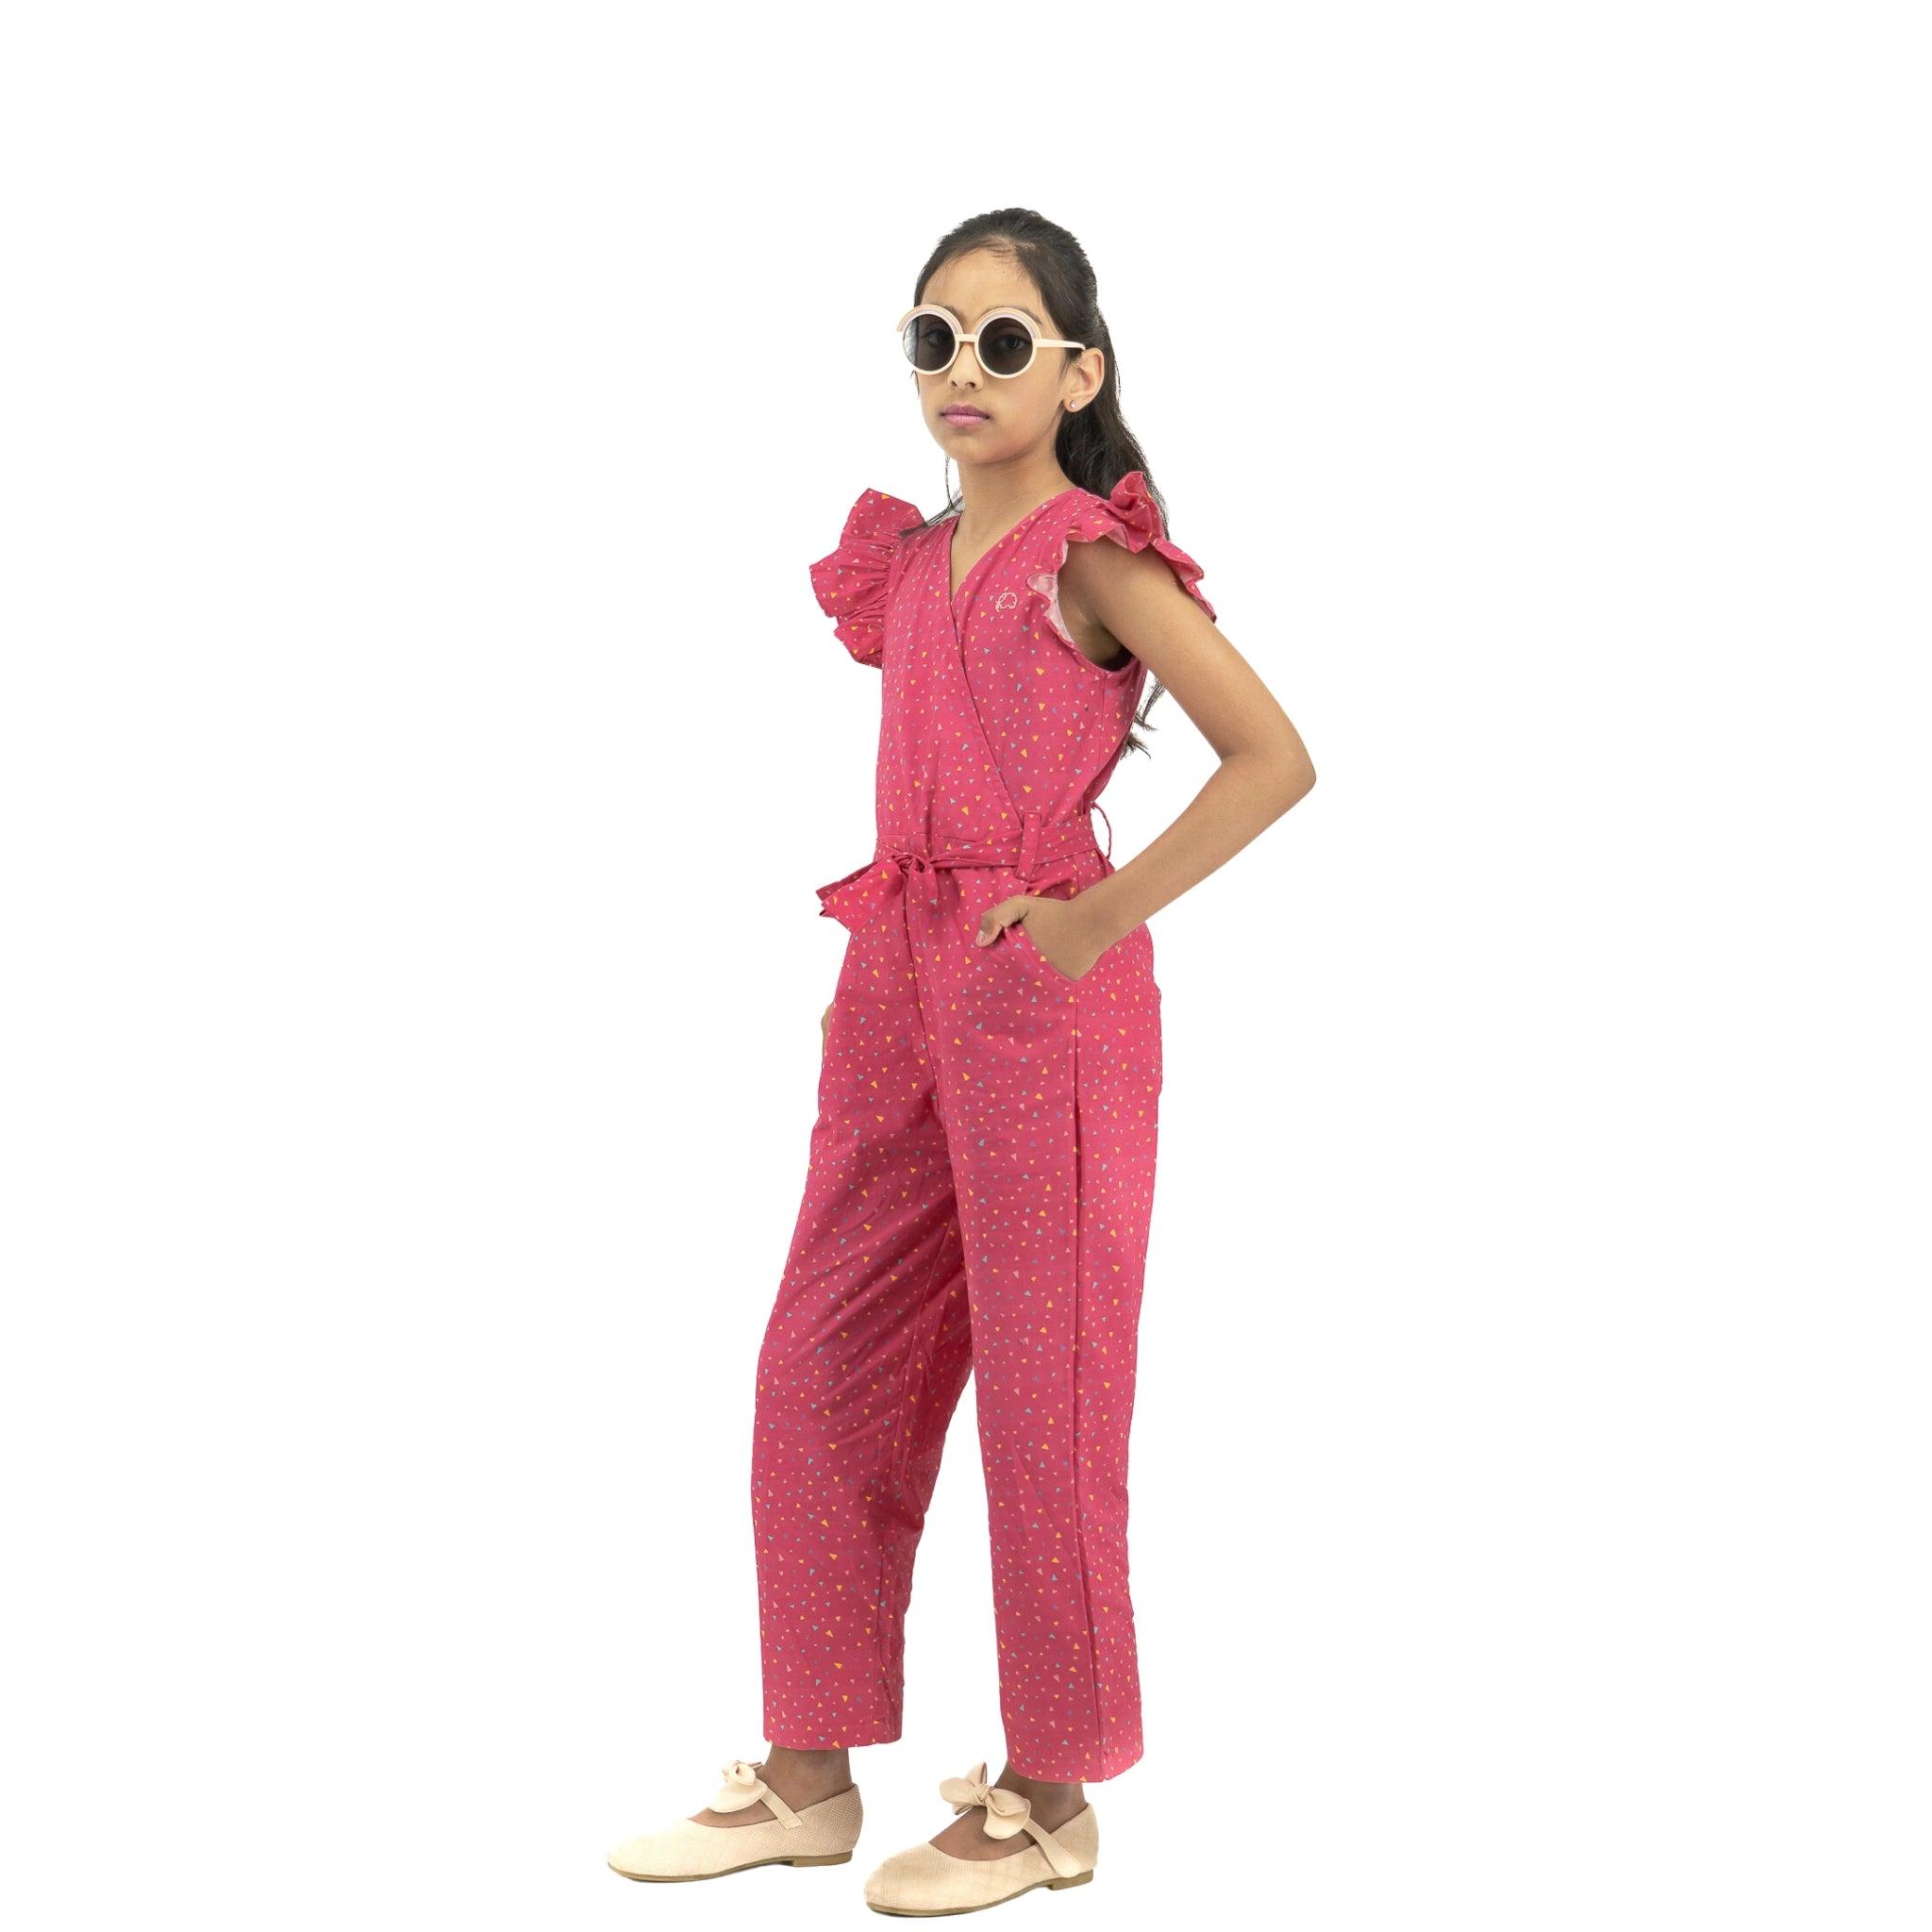 A young girl wearing a Karee Red Rose Cotton Jumpsuit and sunglasses, standing confidently with hands on hips, against a white background.